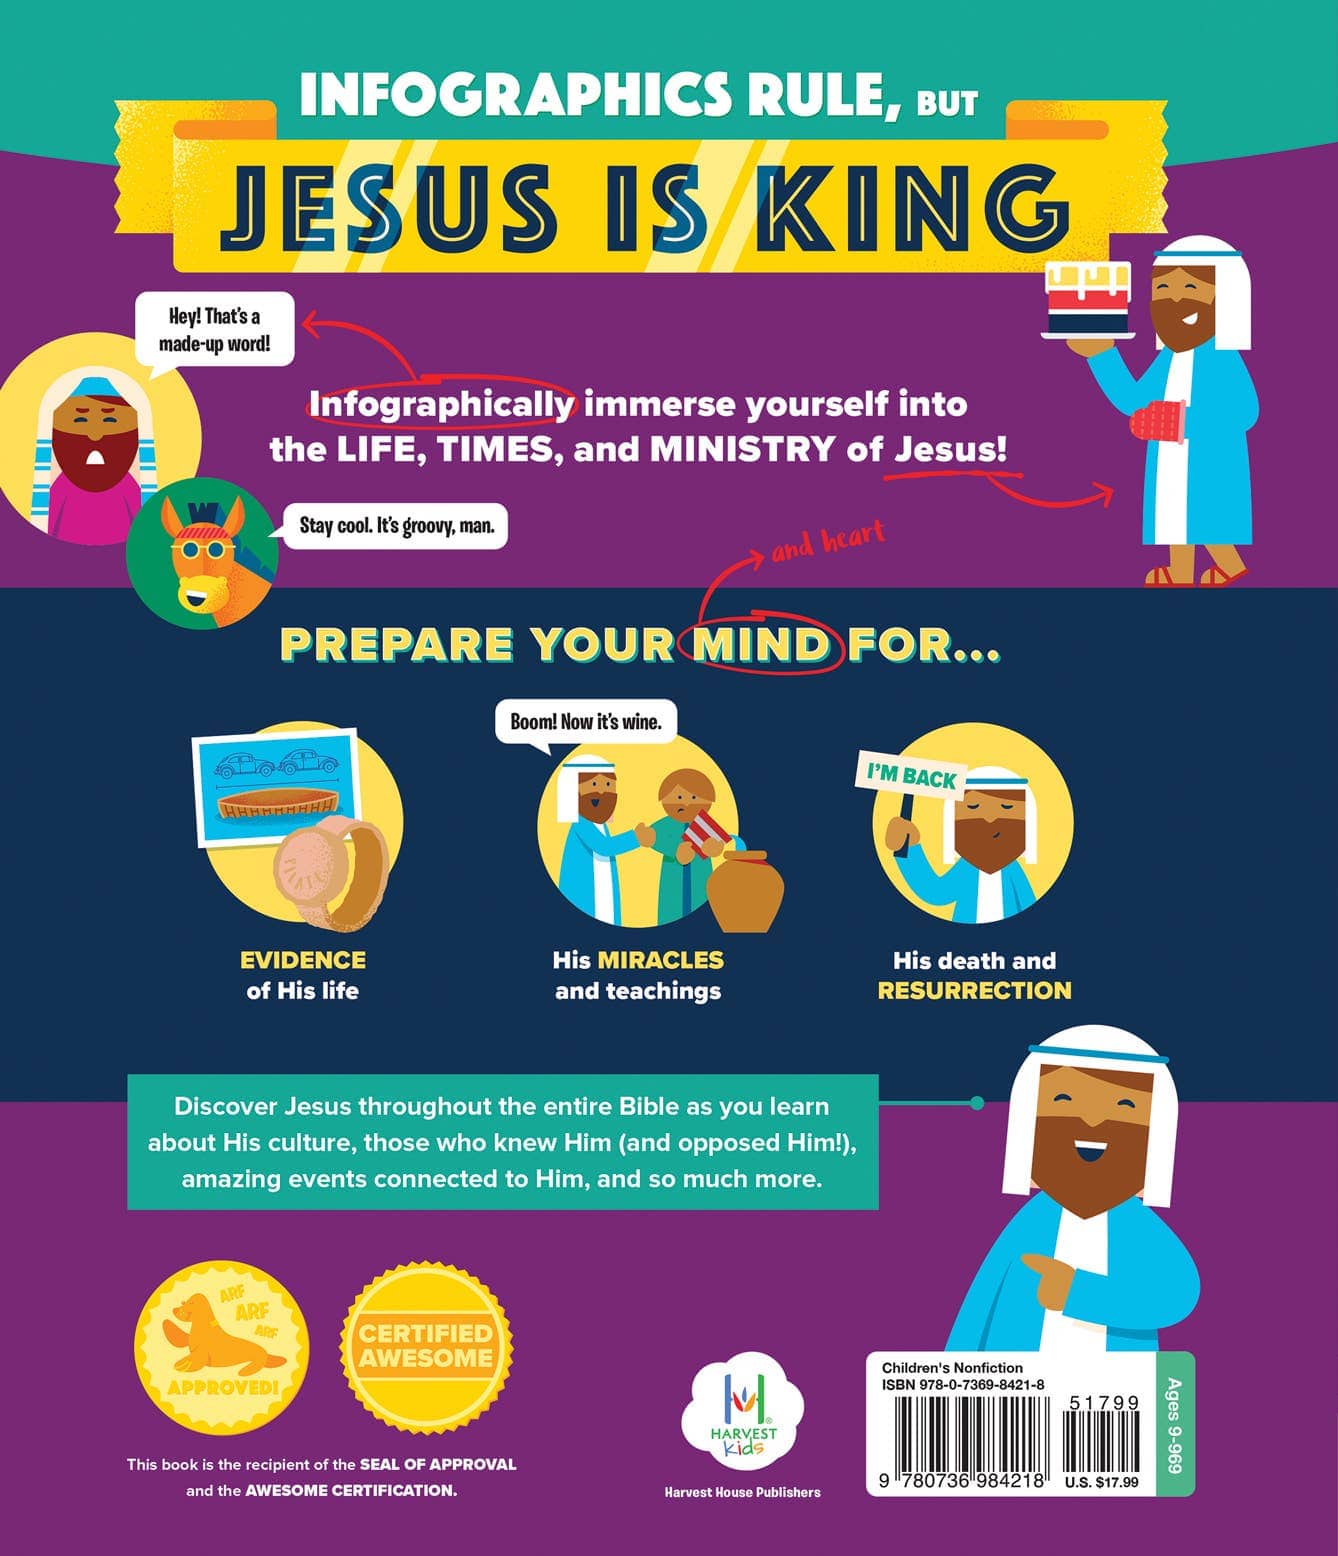 Bible Infographics for Kids Epic Guide to Jesus, Book